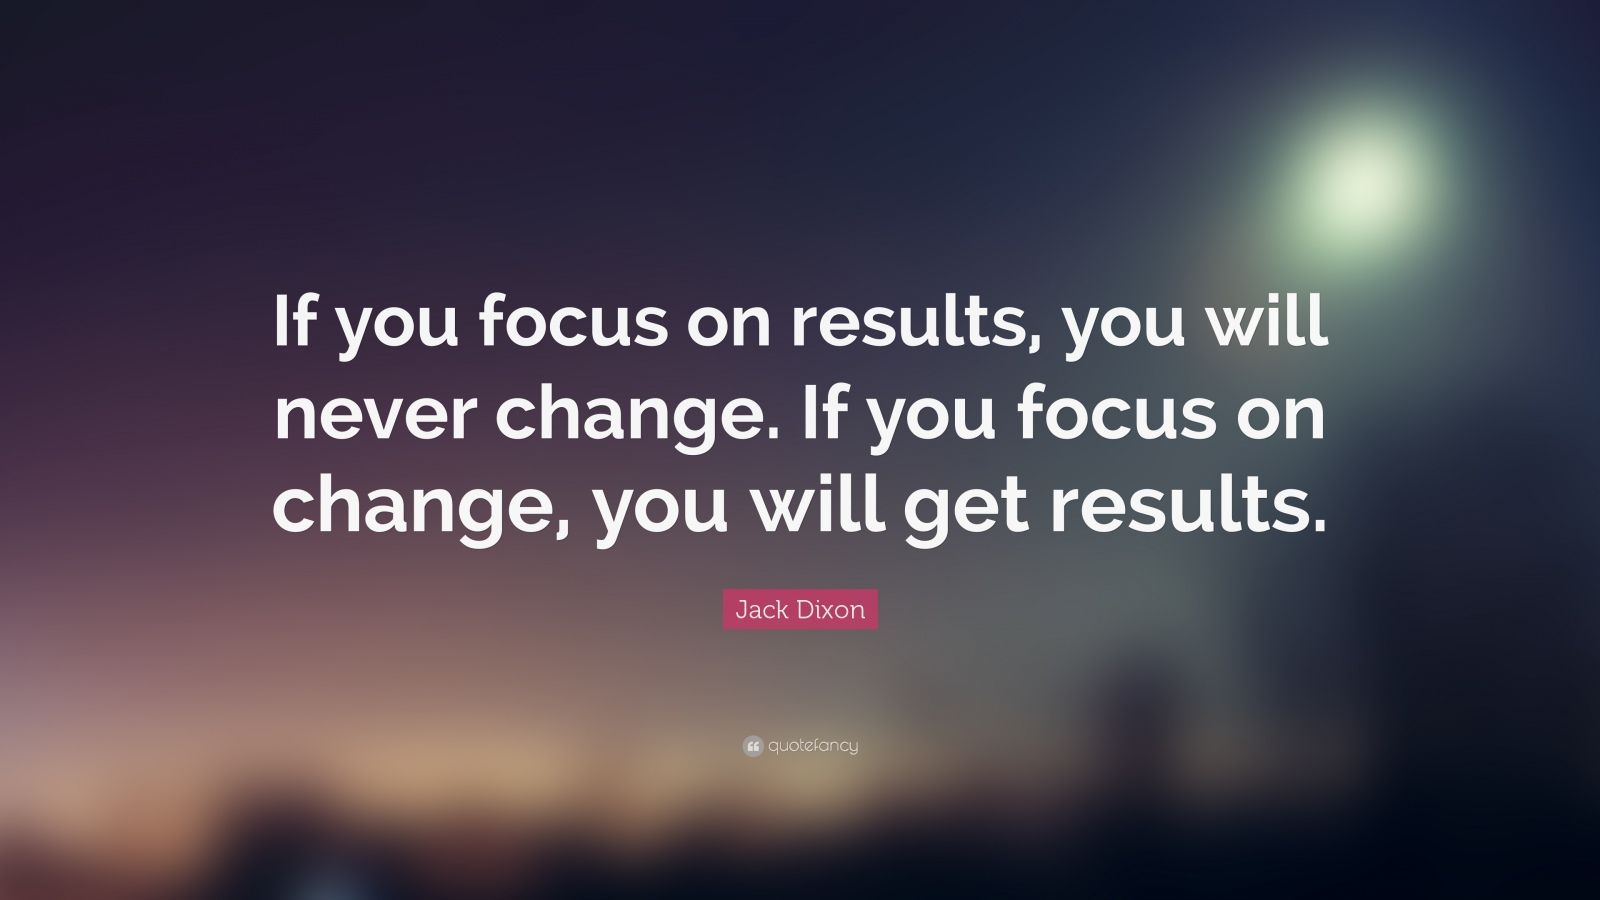 Jack Dixon Quote: “If you focus on results, you will never change. If